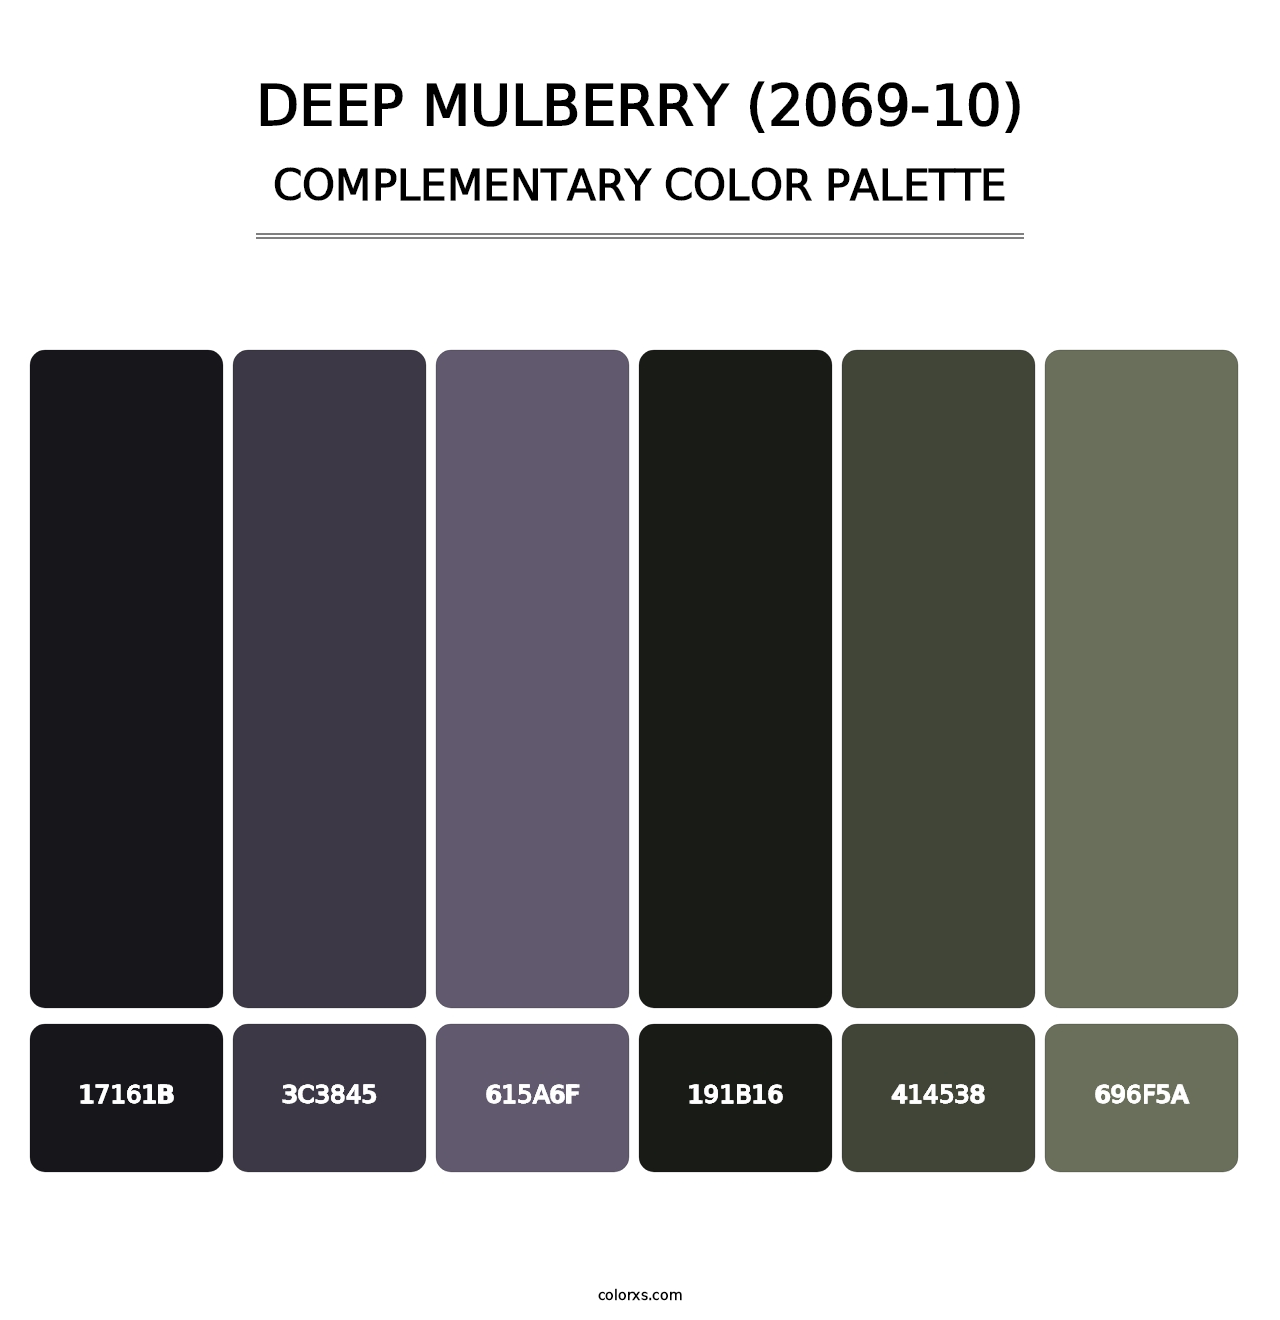 Deep Mulberry (2069-10) - Complementary Color Palette